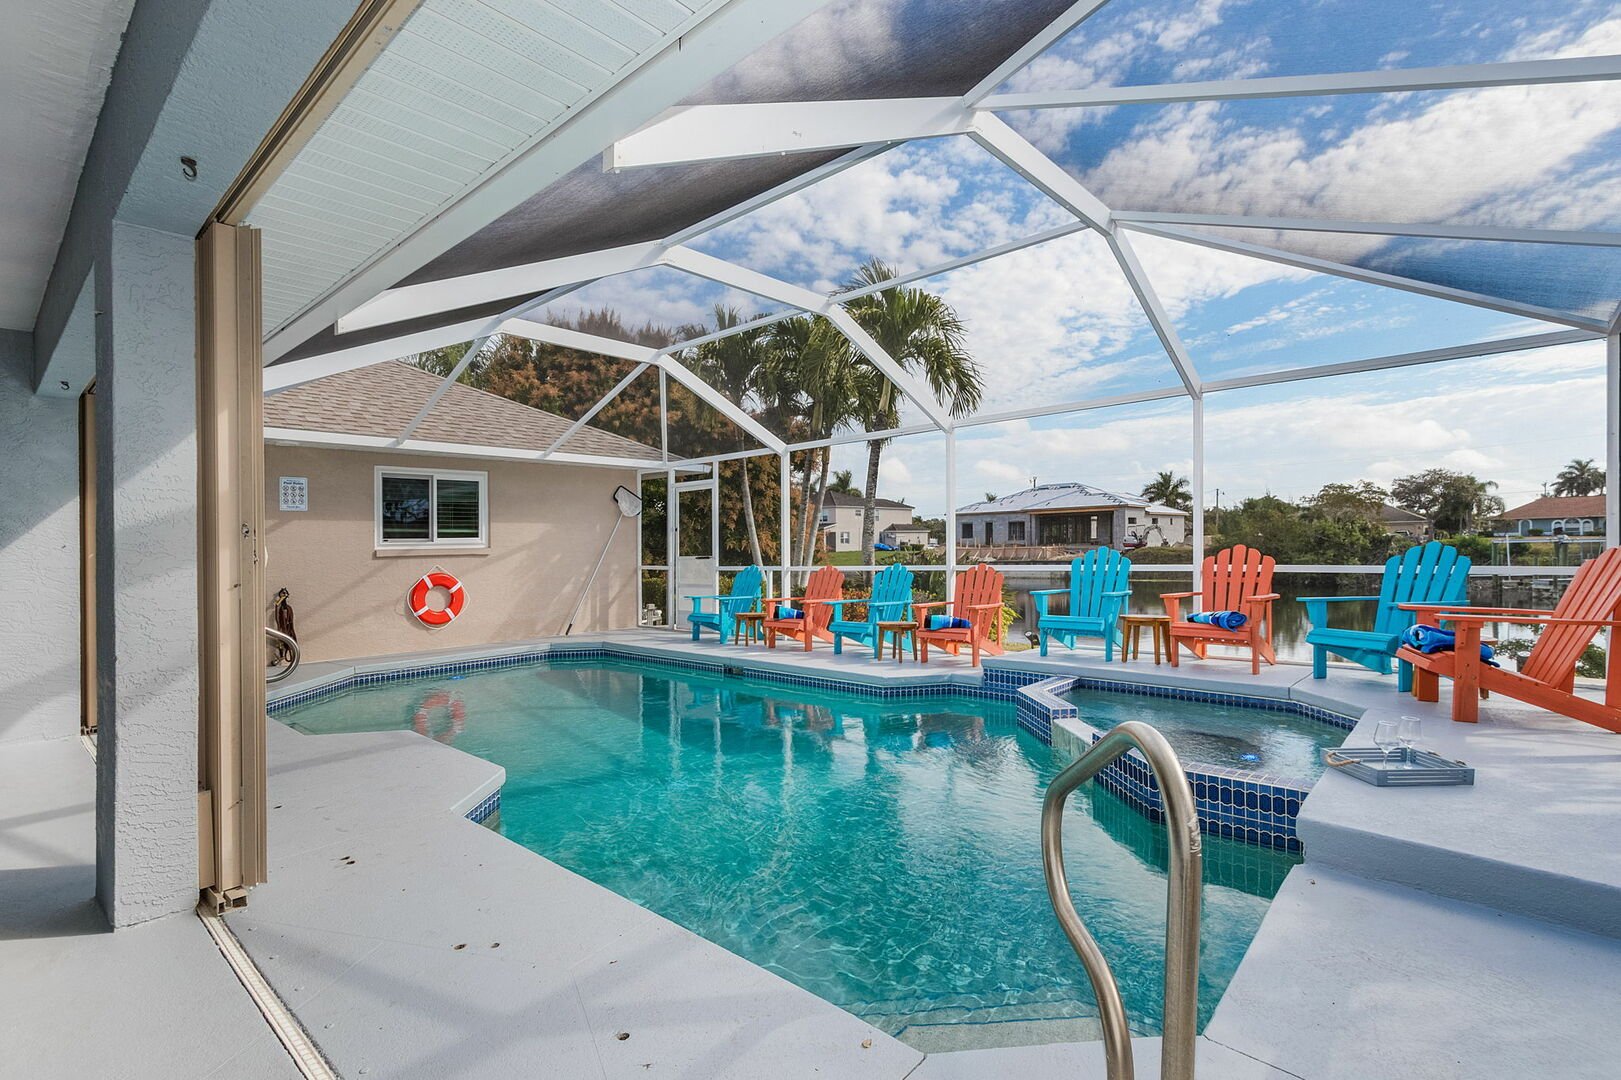 HEATED POOL AND HOT TUB/SPA
(a year-long heated private pool and hot tub/spa, fully enclosed with a pool cage, 65